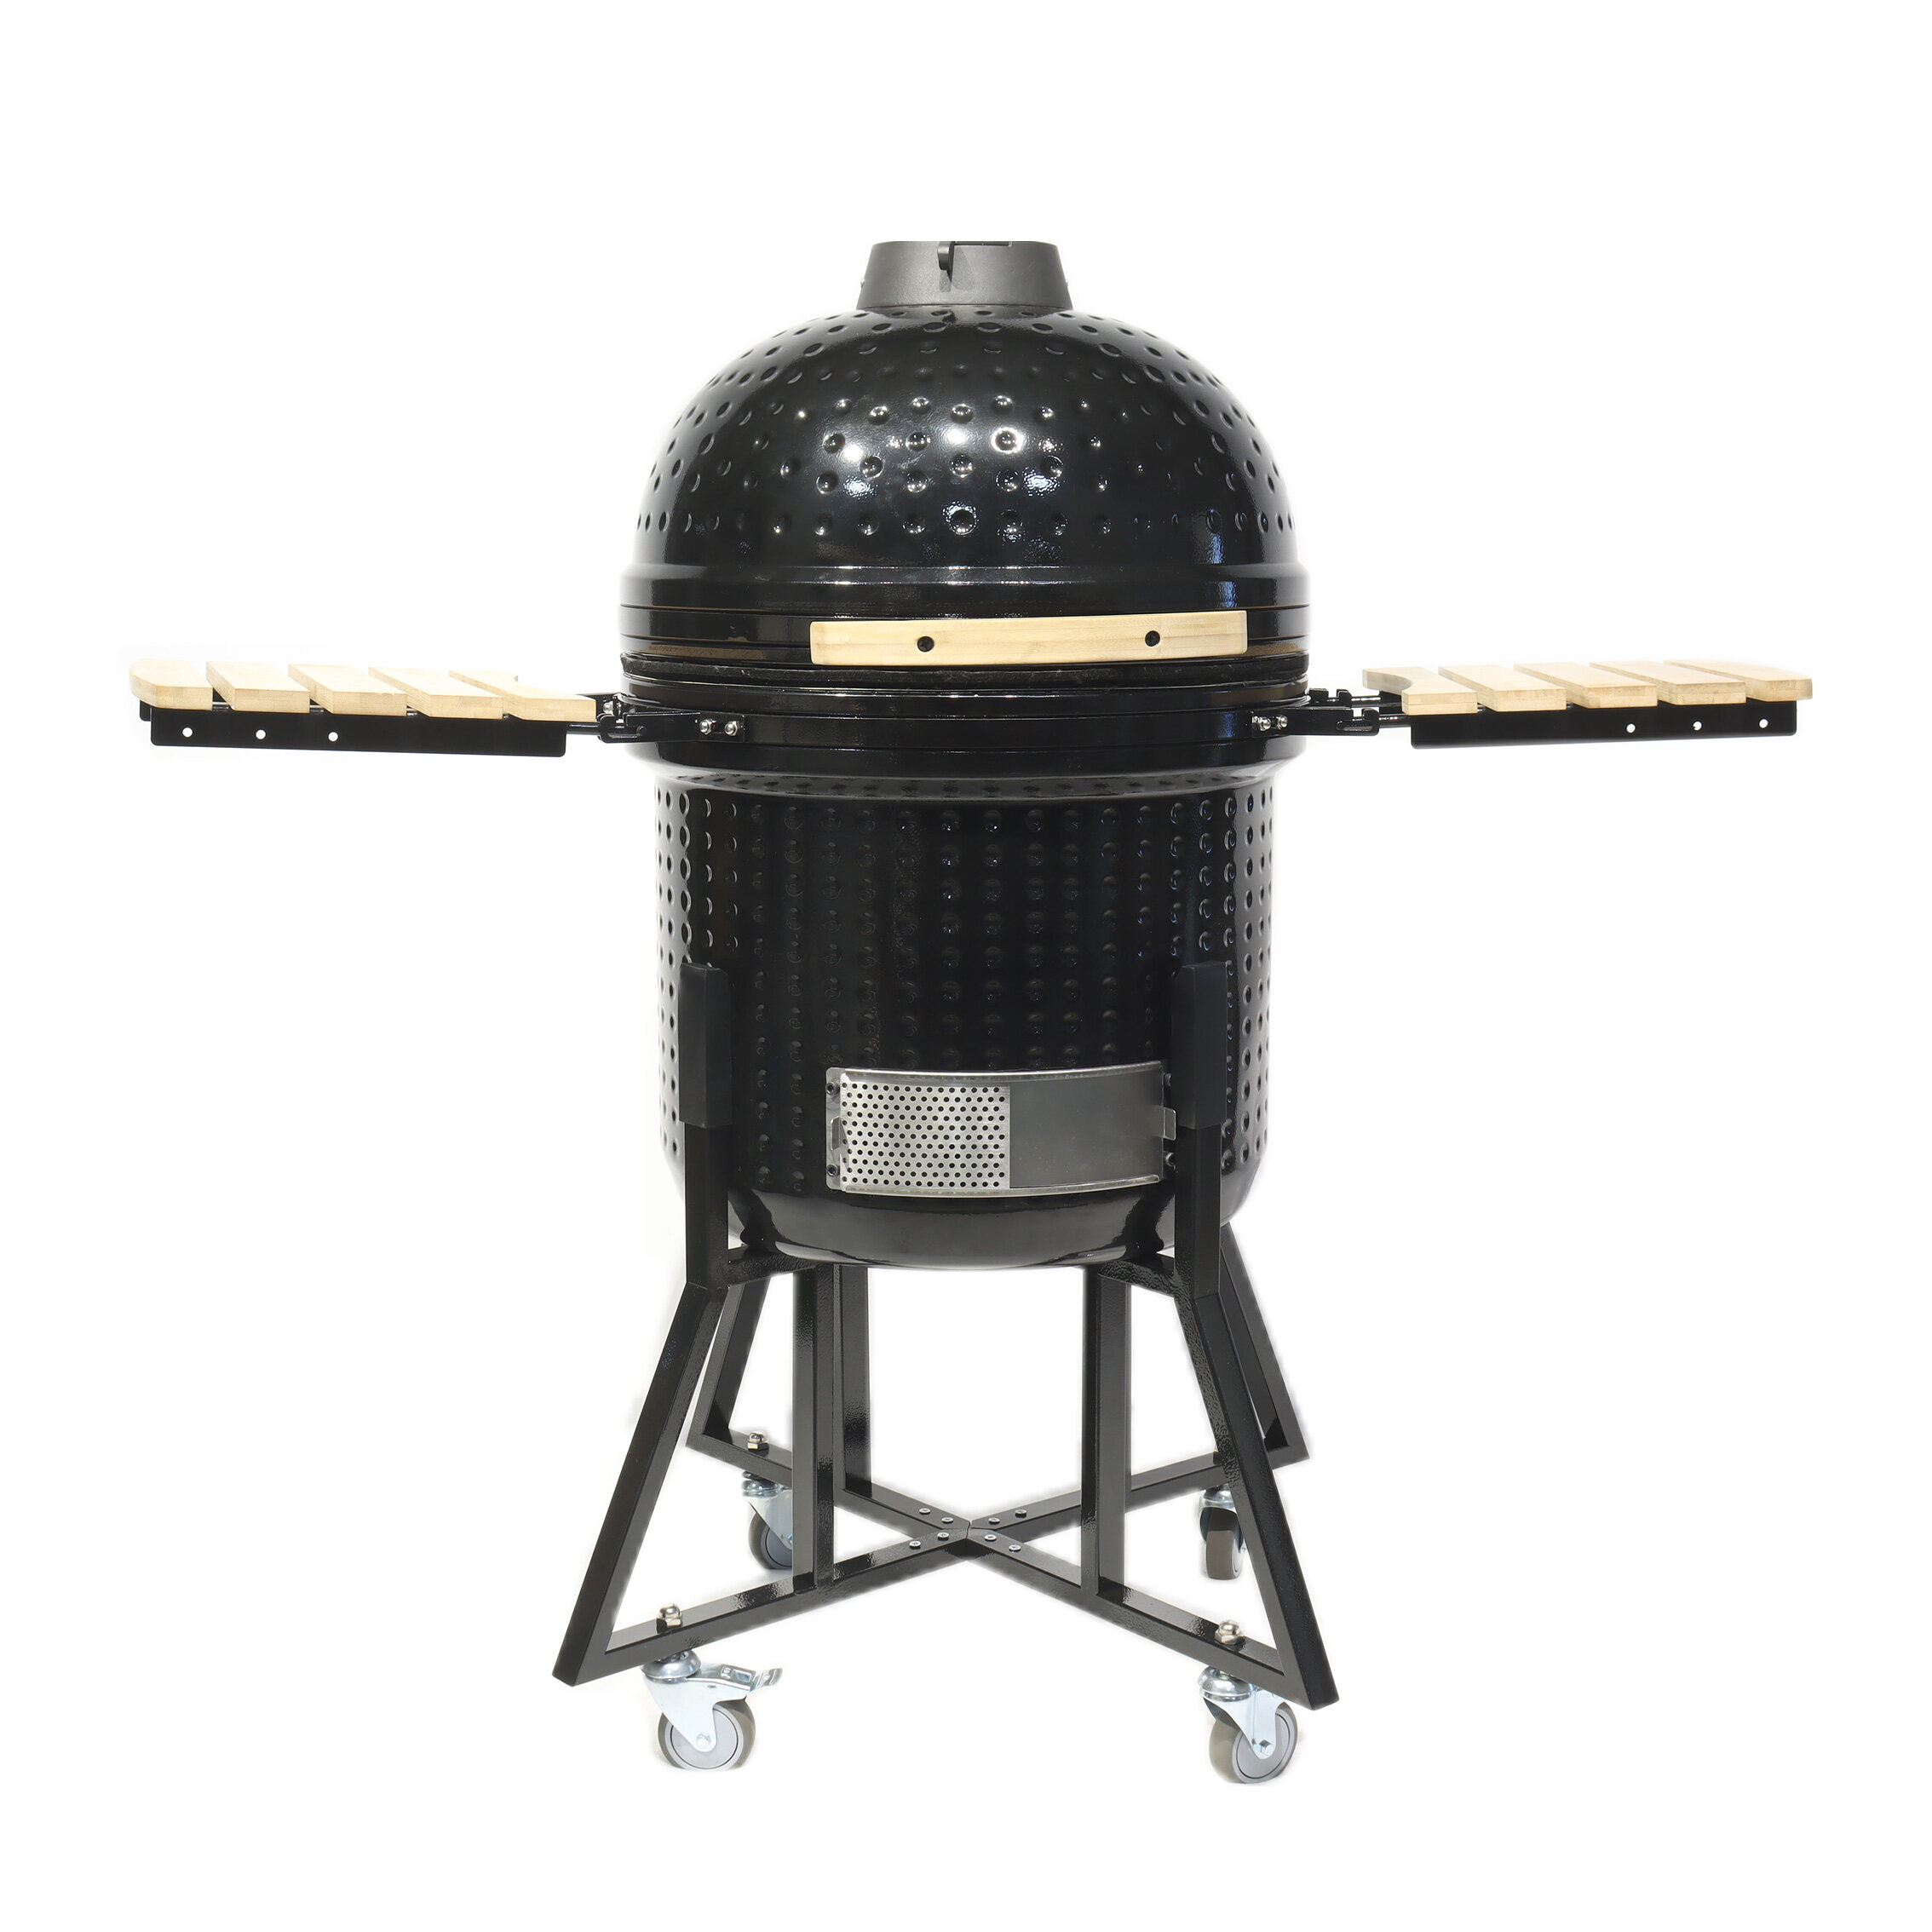 22 Inch Outdoor Ceramic Charcoal Barbecue Grill - Vertical Drum Barbecue Grills factory